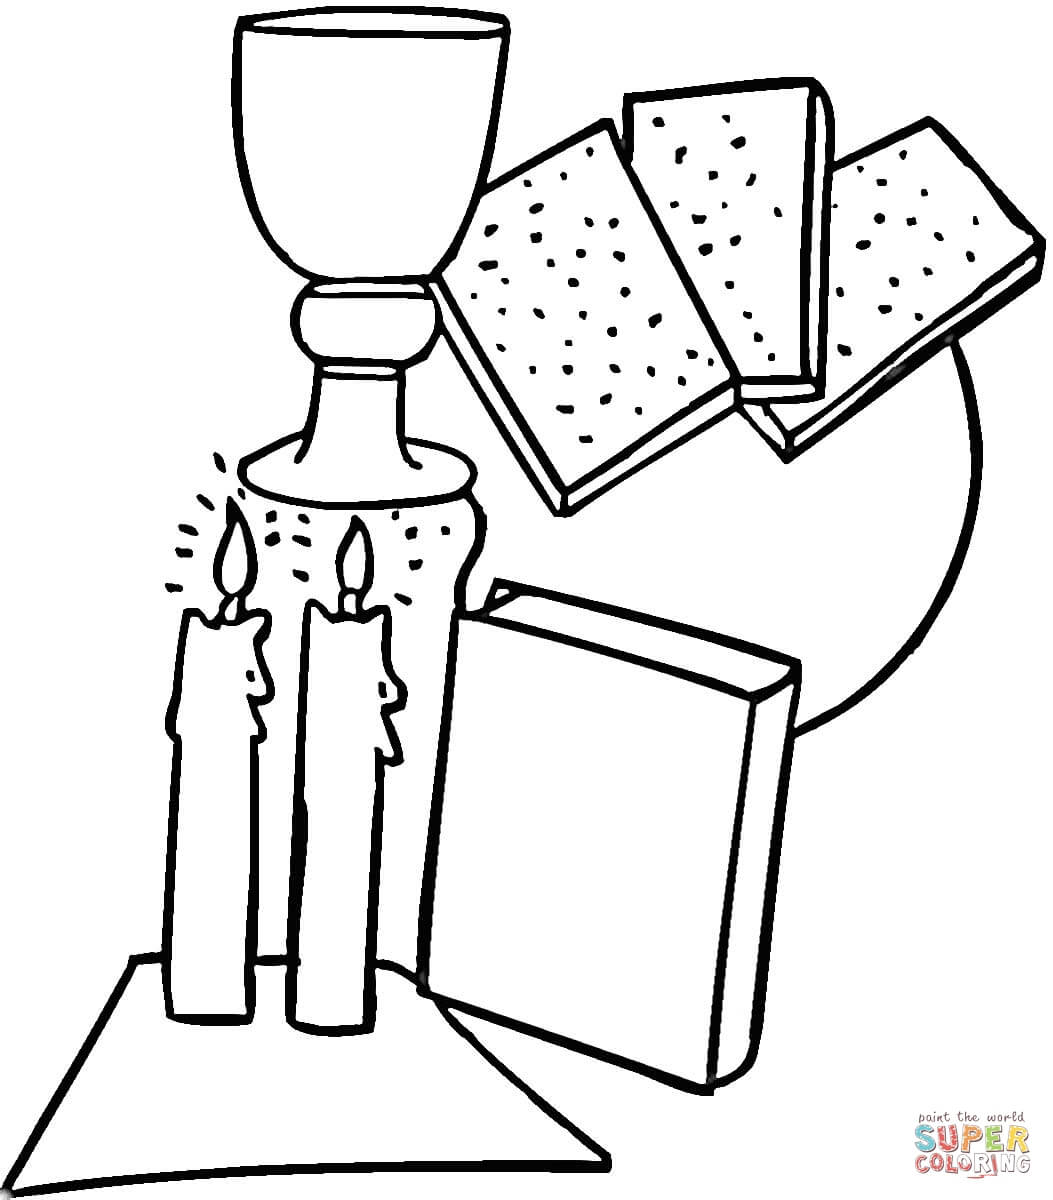 Pesach coloring page | Free Printable Coloring Pages